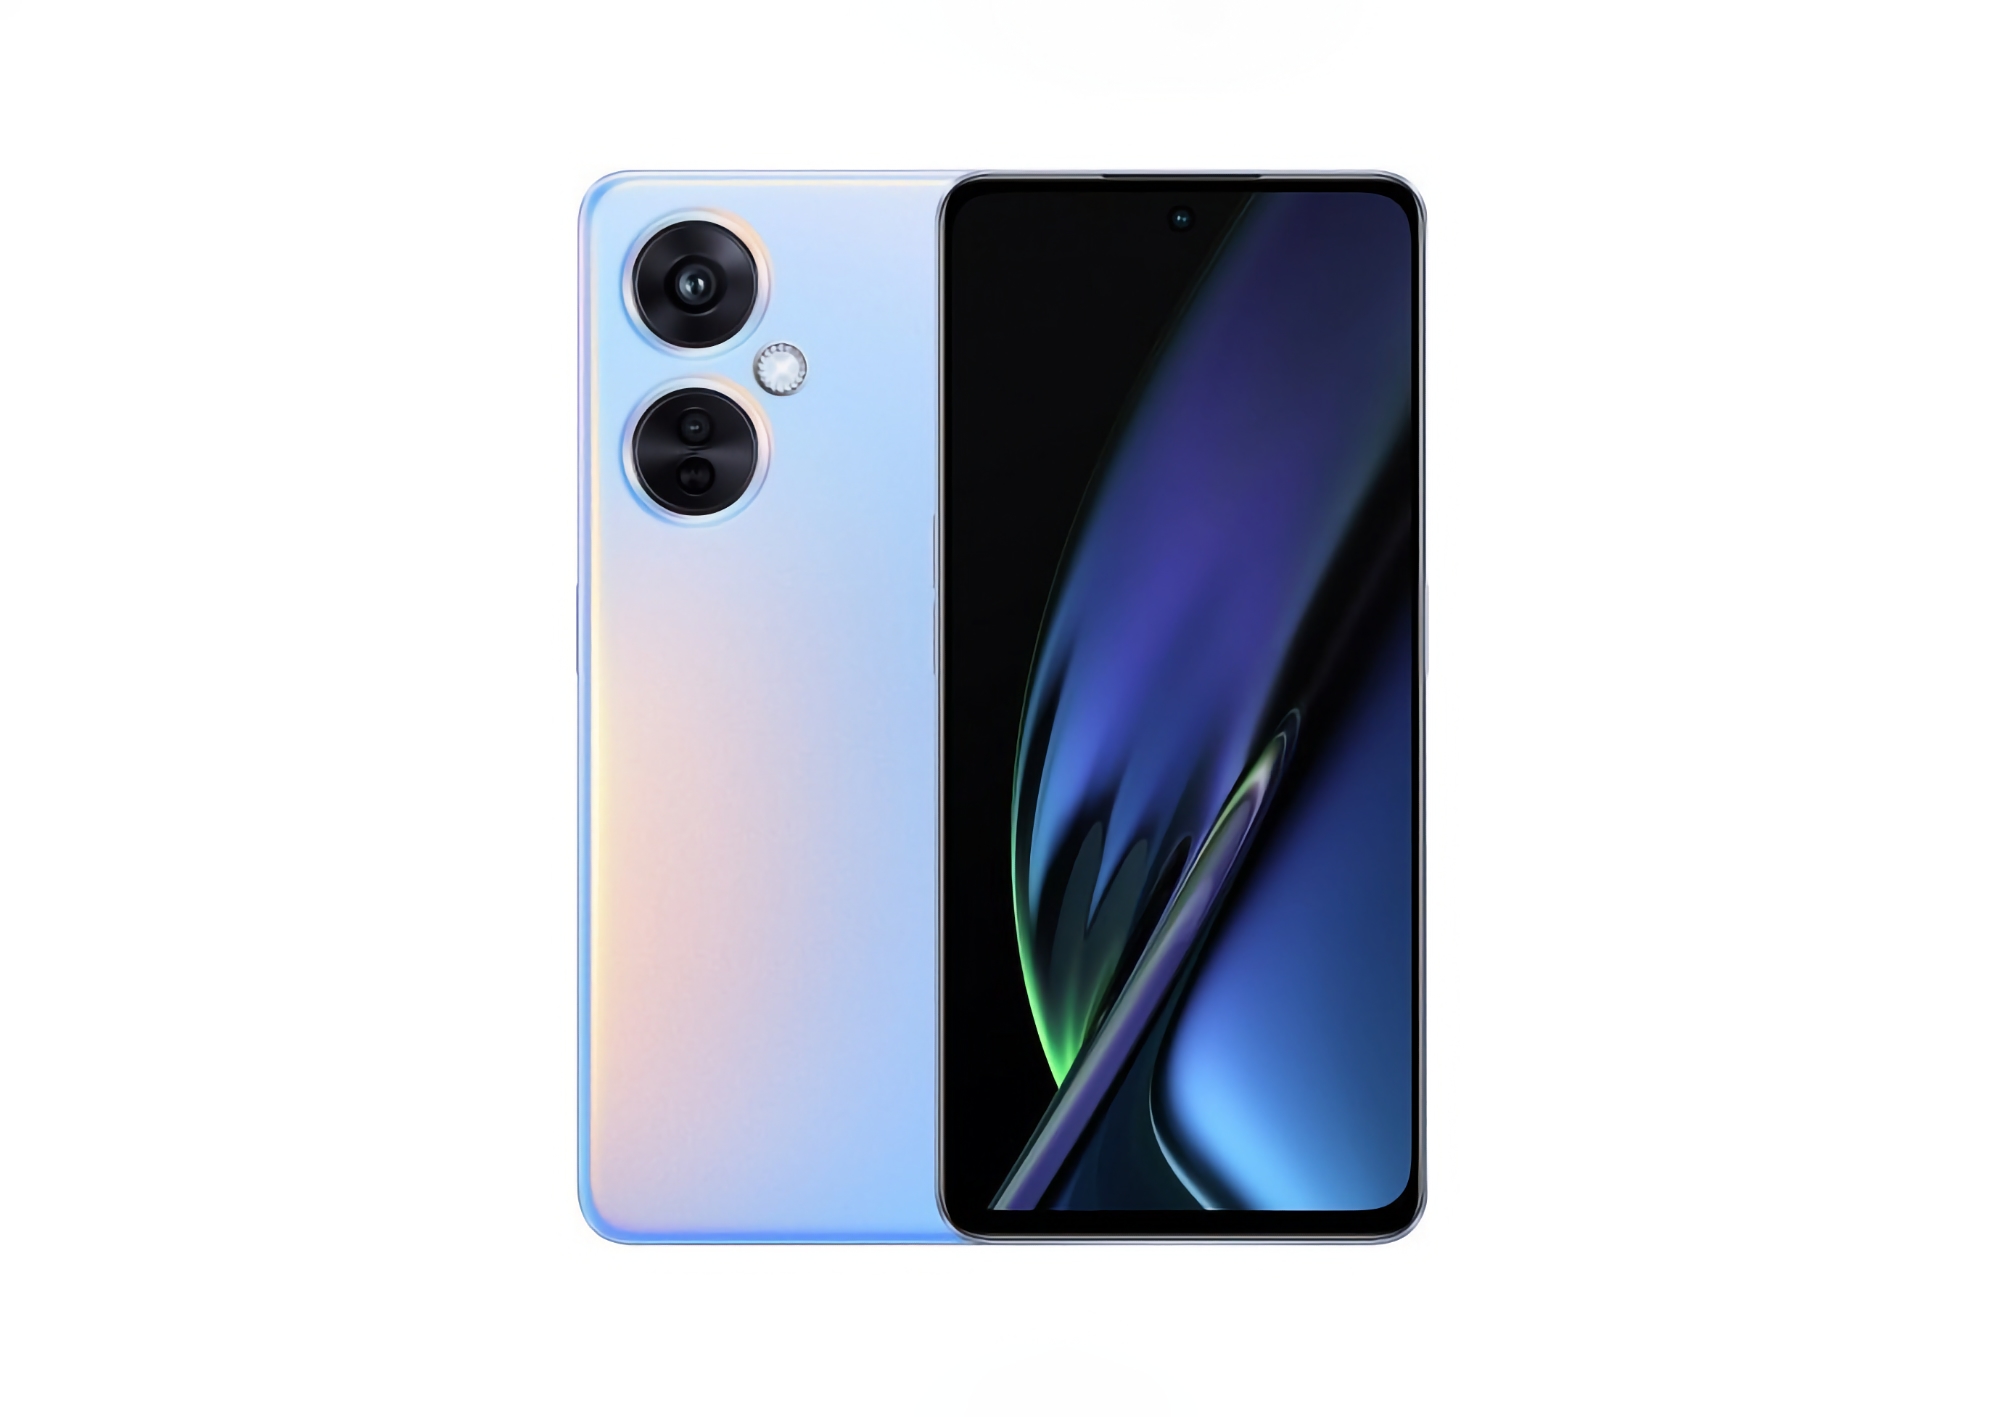 OPPO K11x: 120Hz screen, Snapdragon 695 chip and 108MP camera for $210